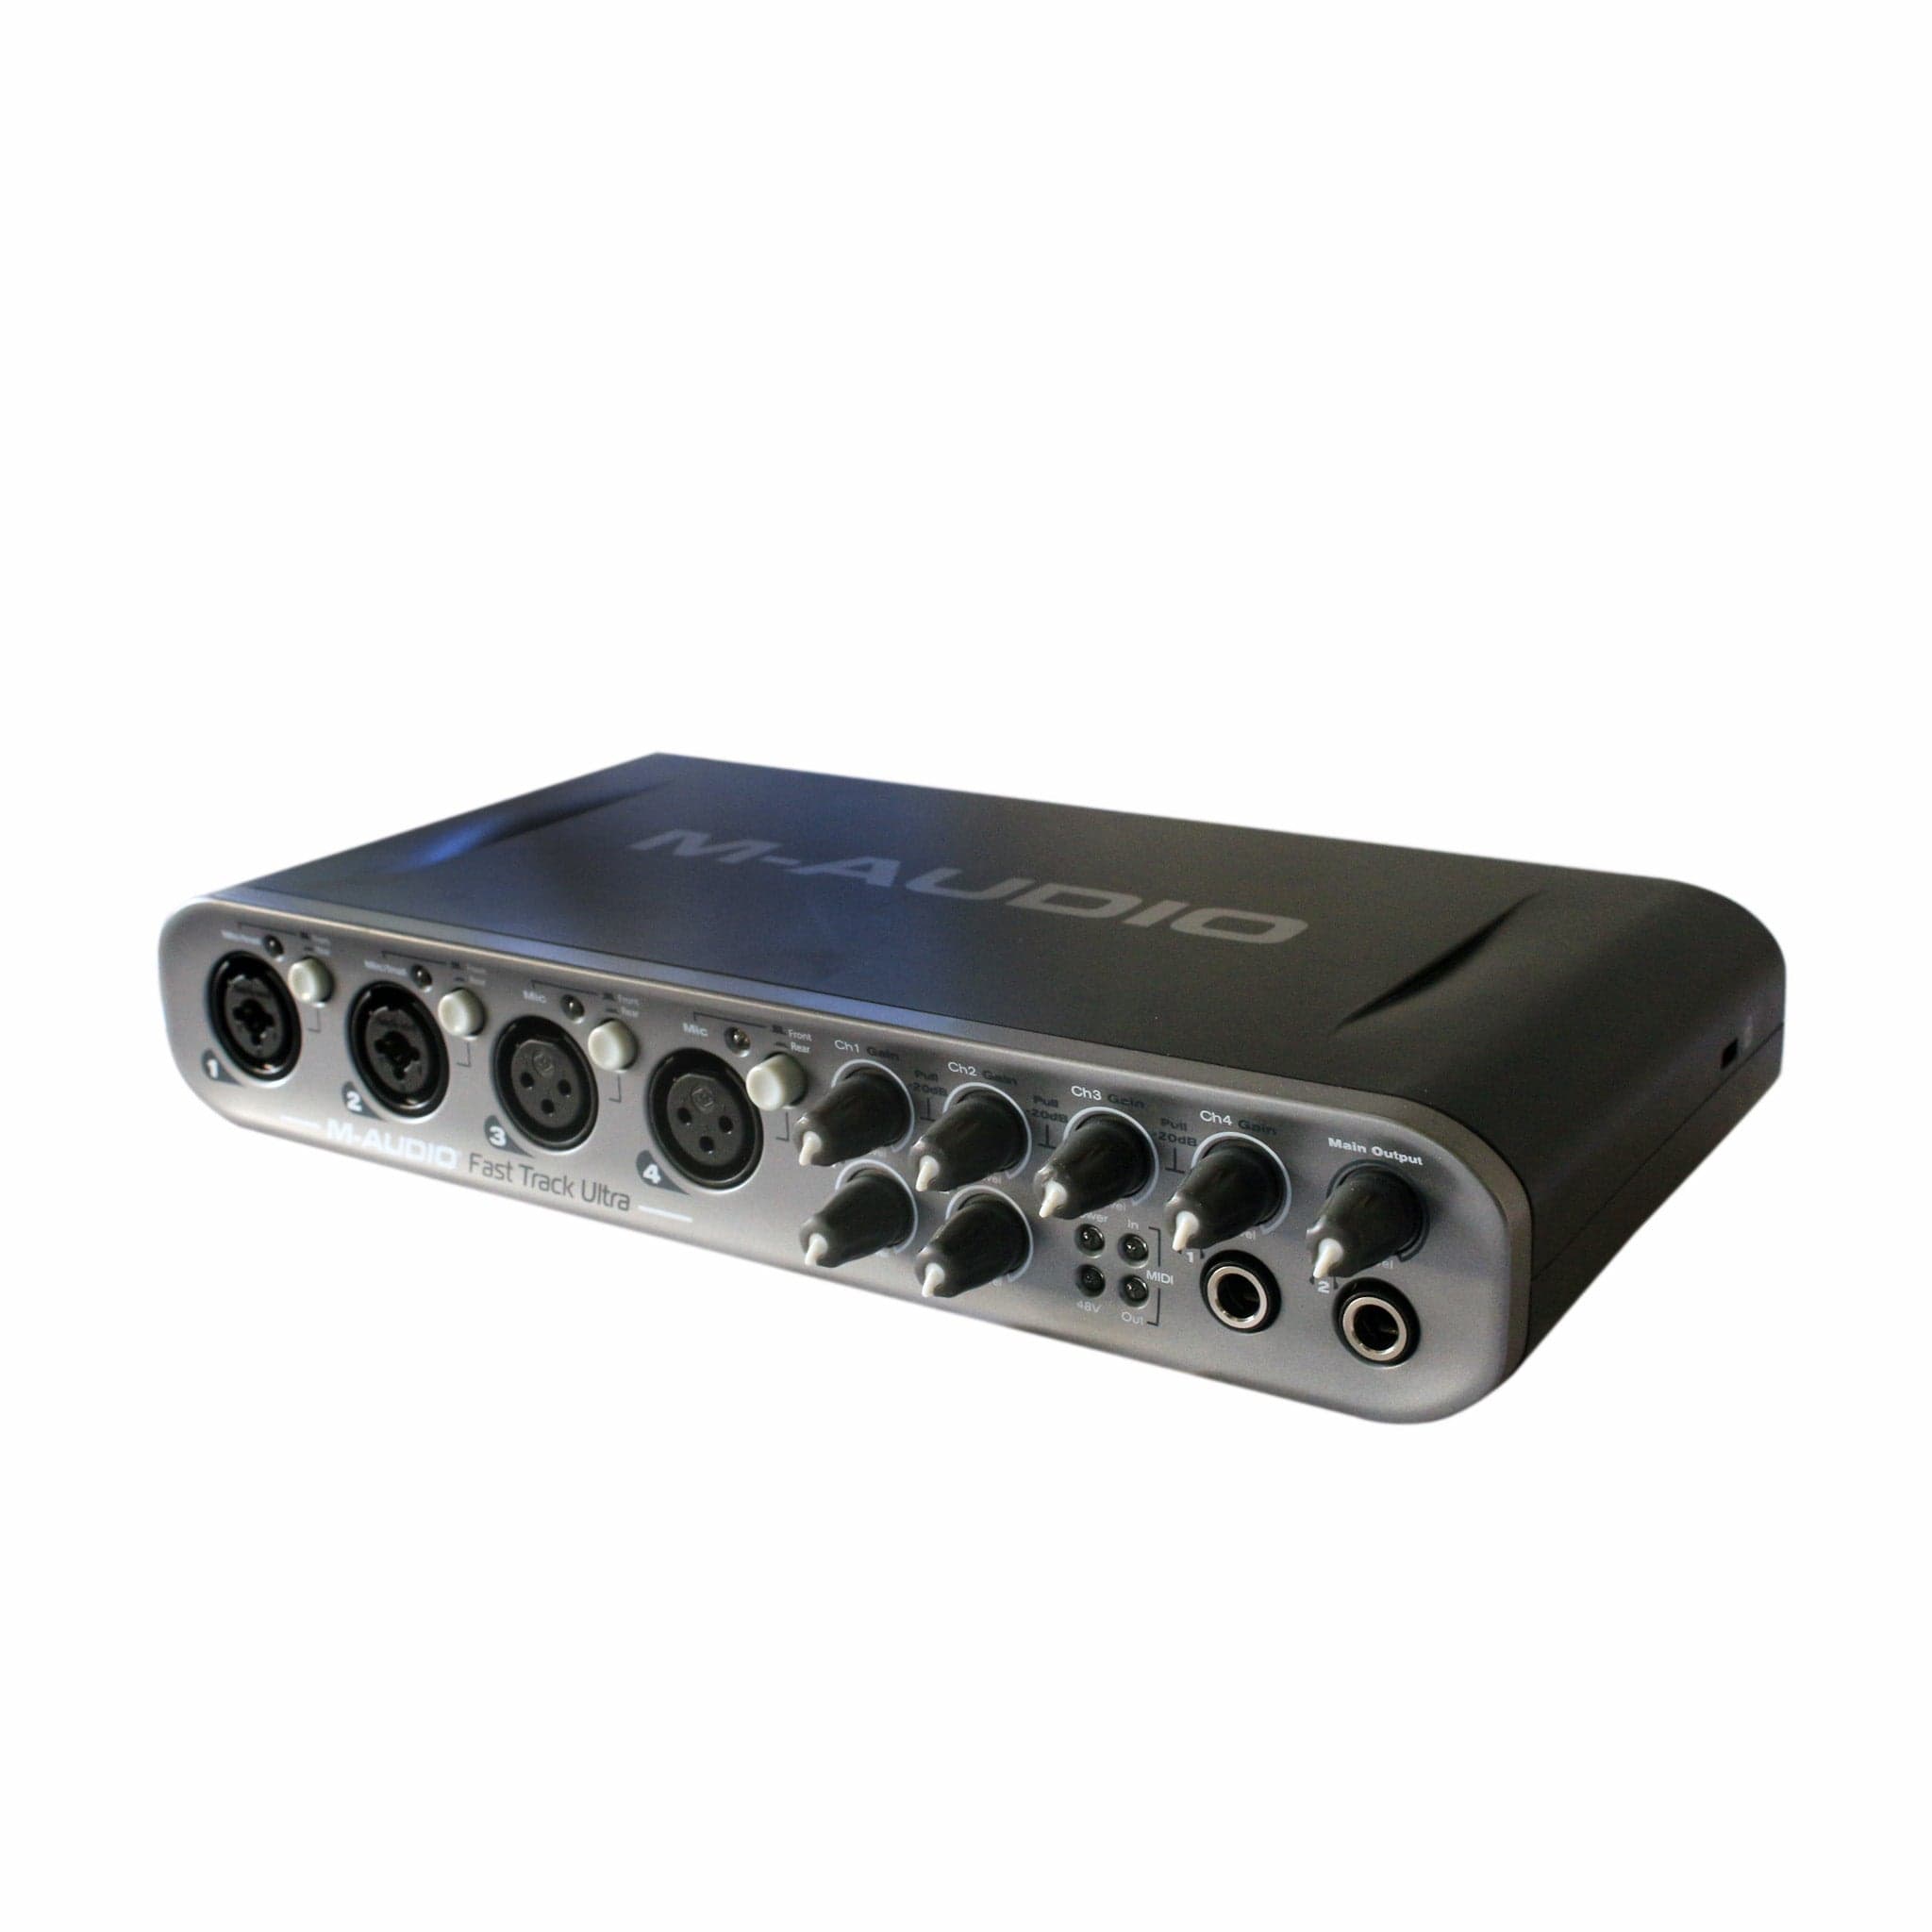 Carte son M-Audio Fast Track d'occasion - Zikinf